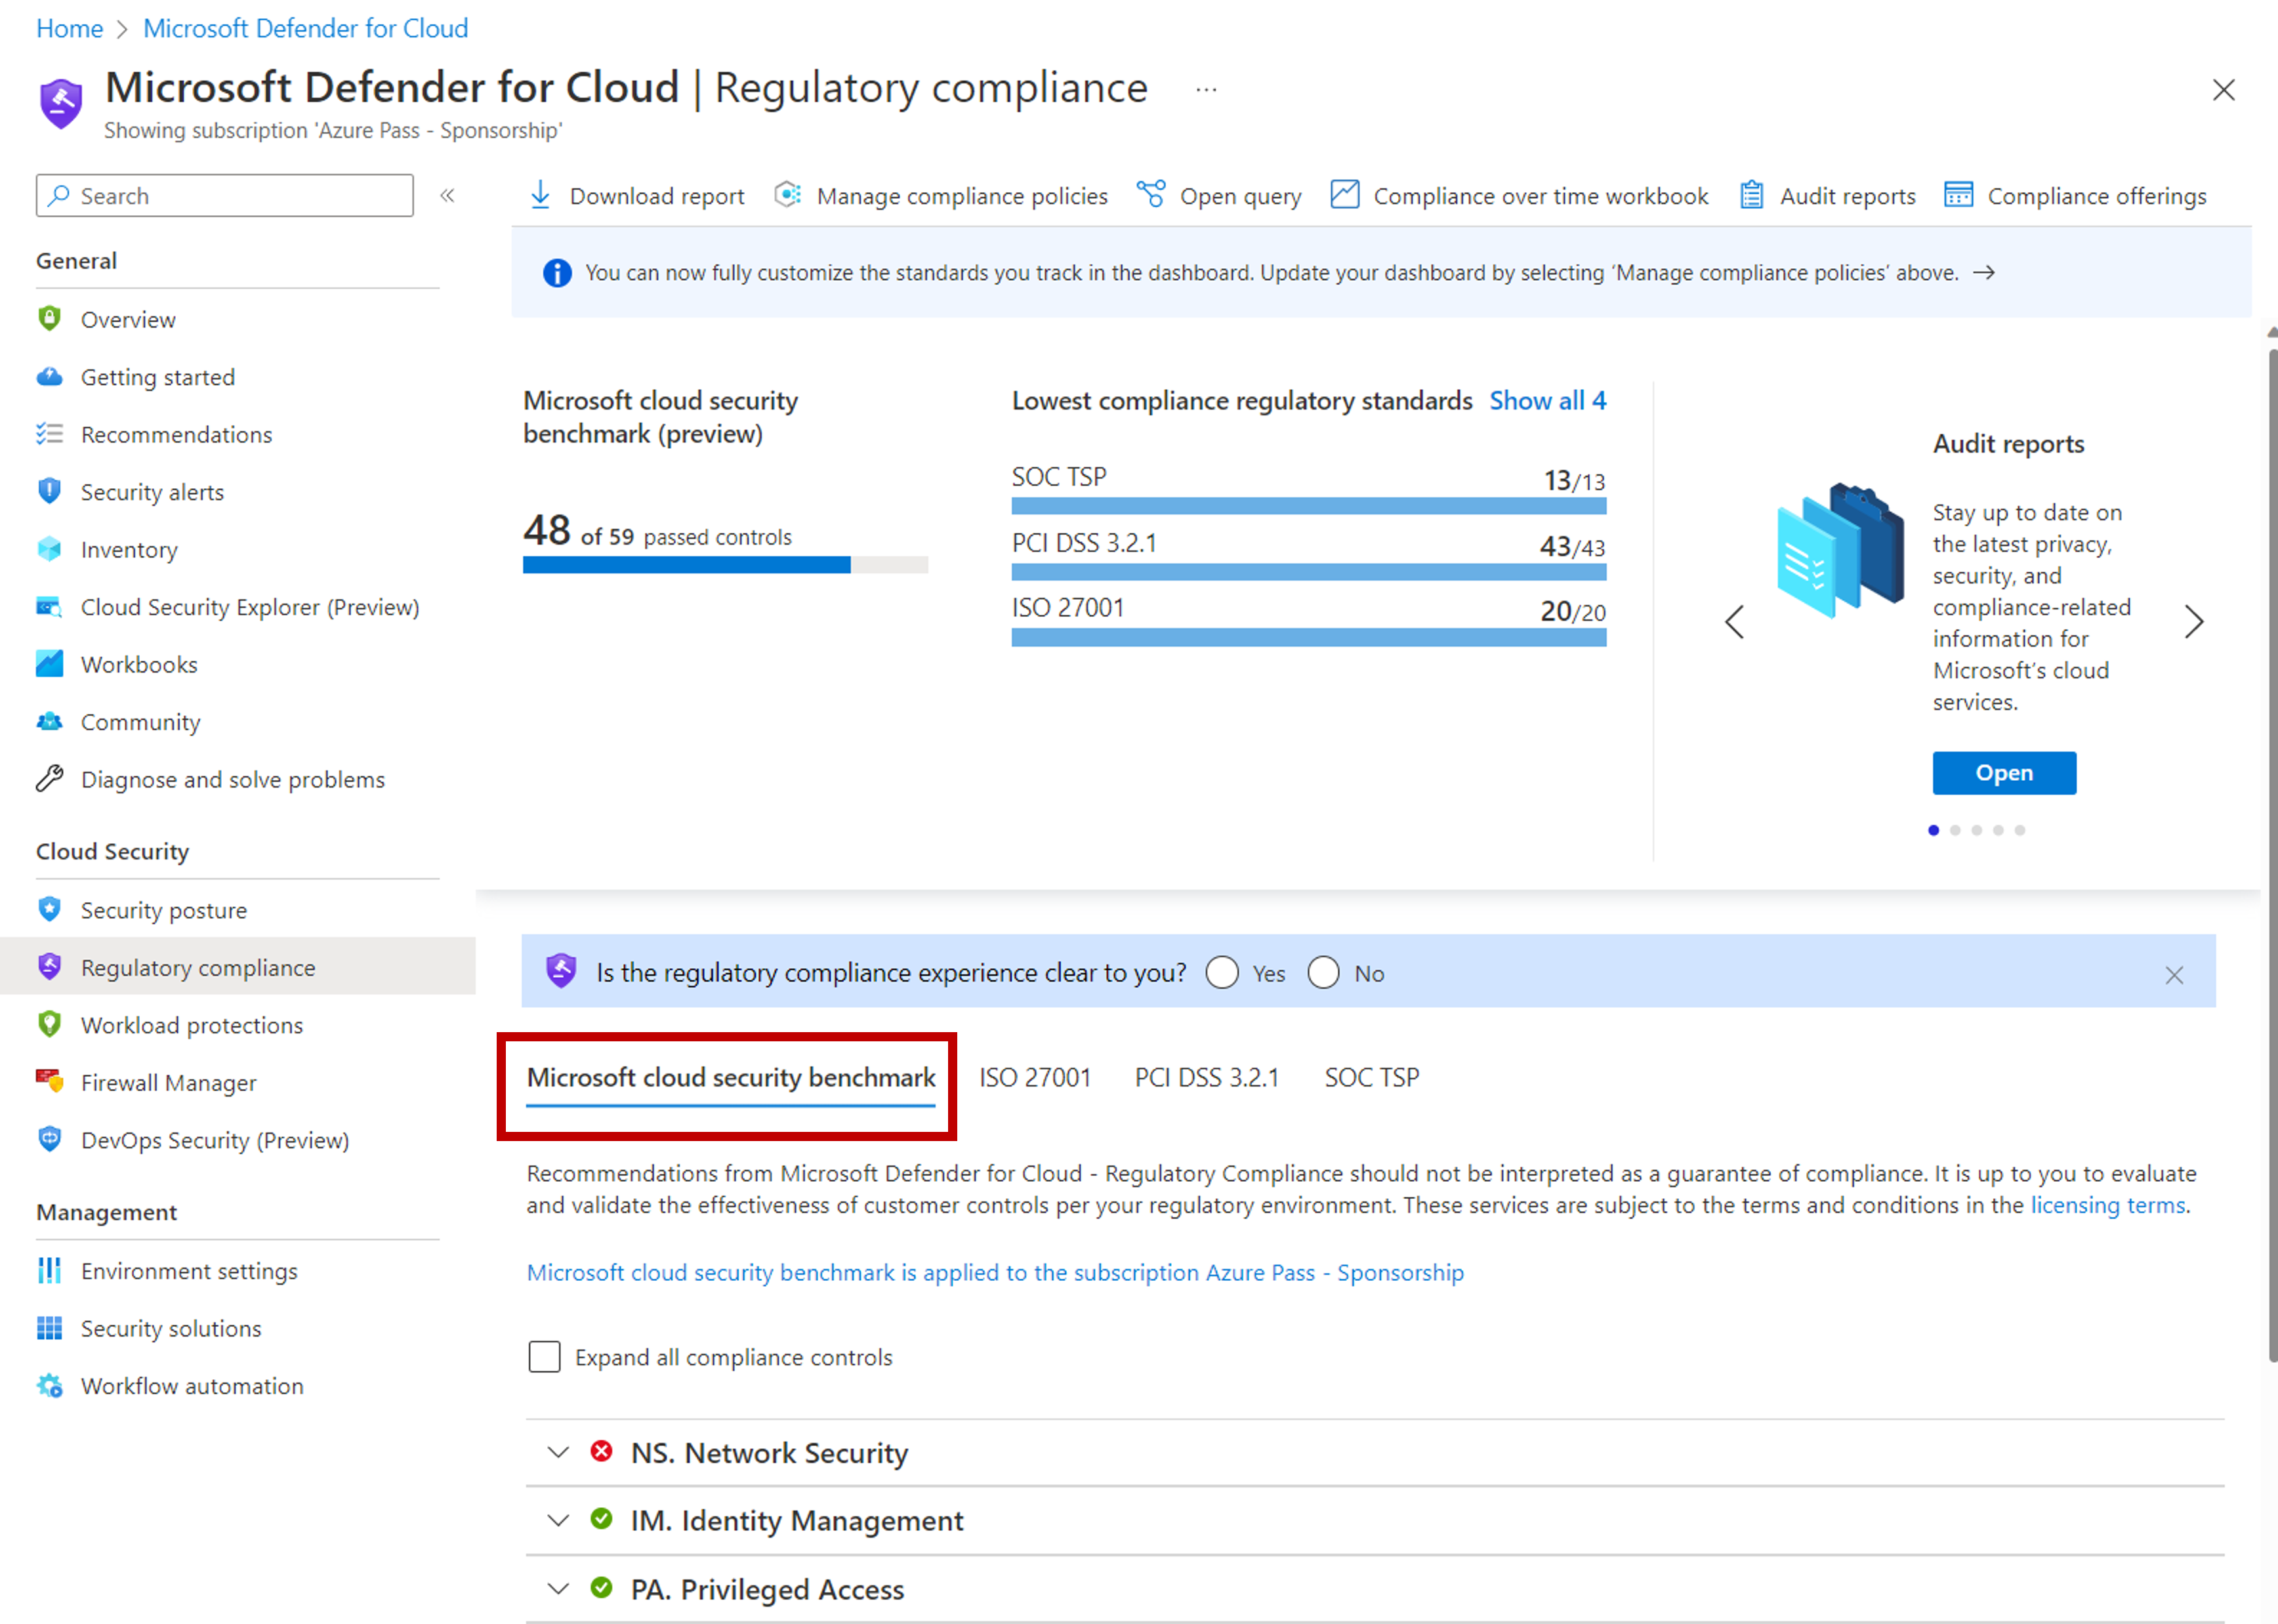 Screenshot of Microsoft Defender for Cloud showing status of regulatory compliance against Microsoft cloud security benchmark.